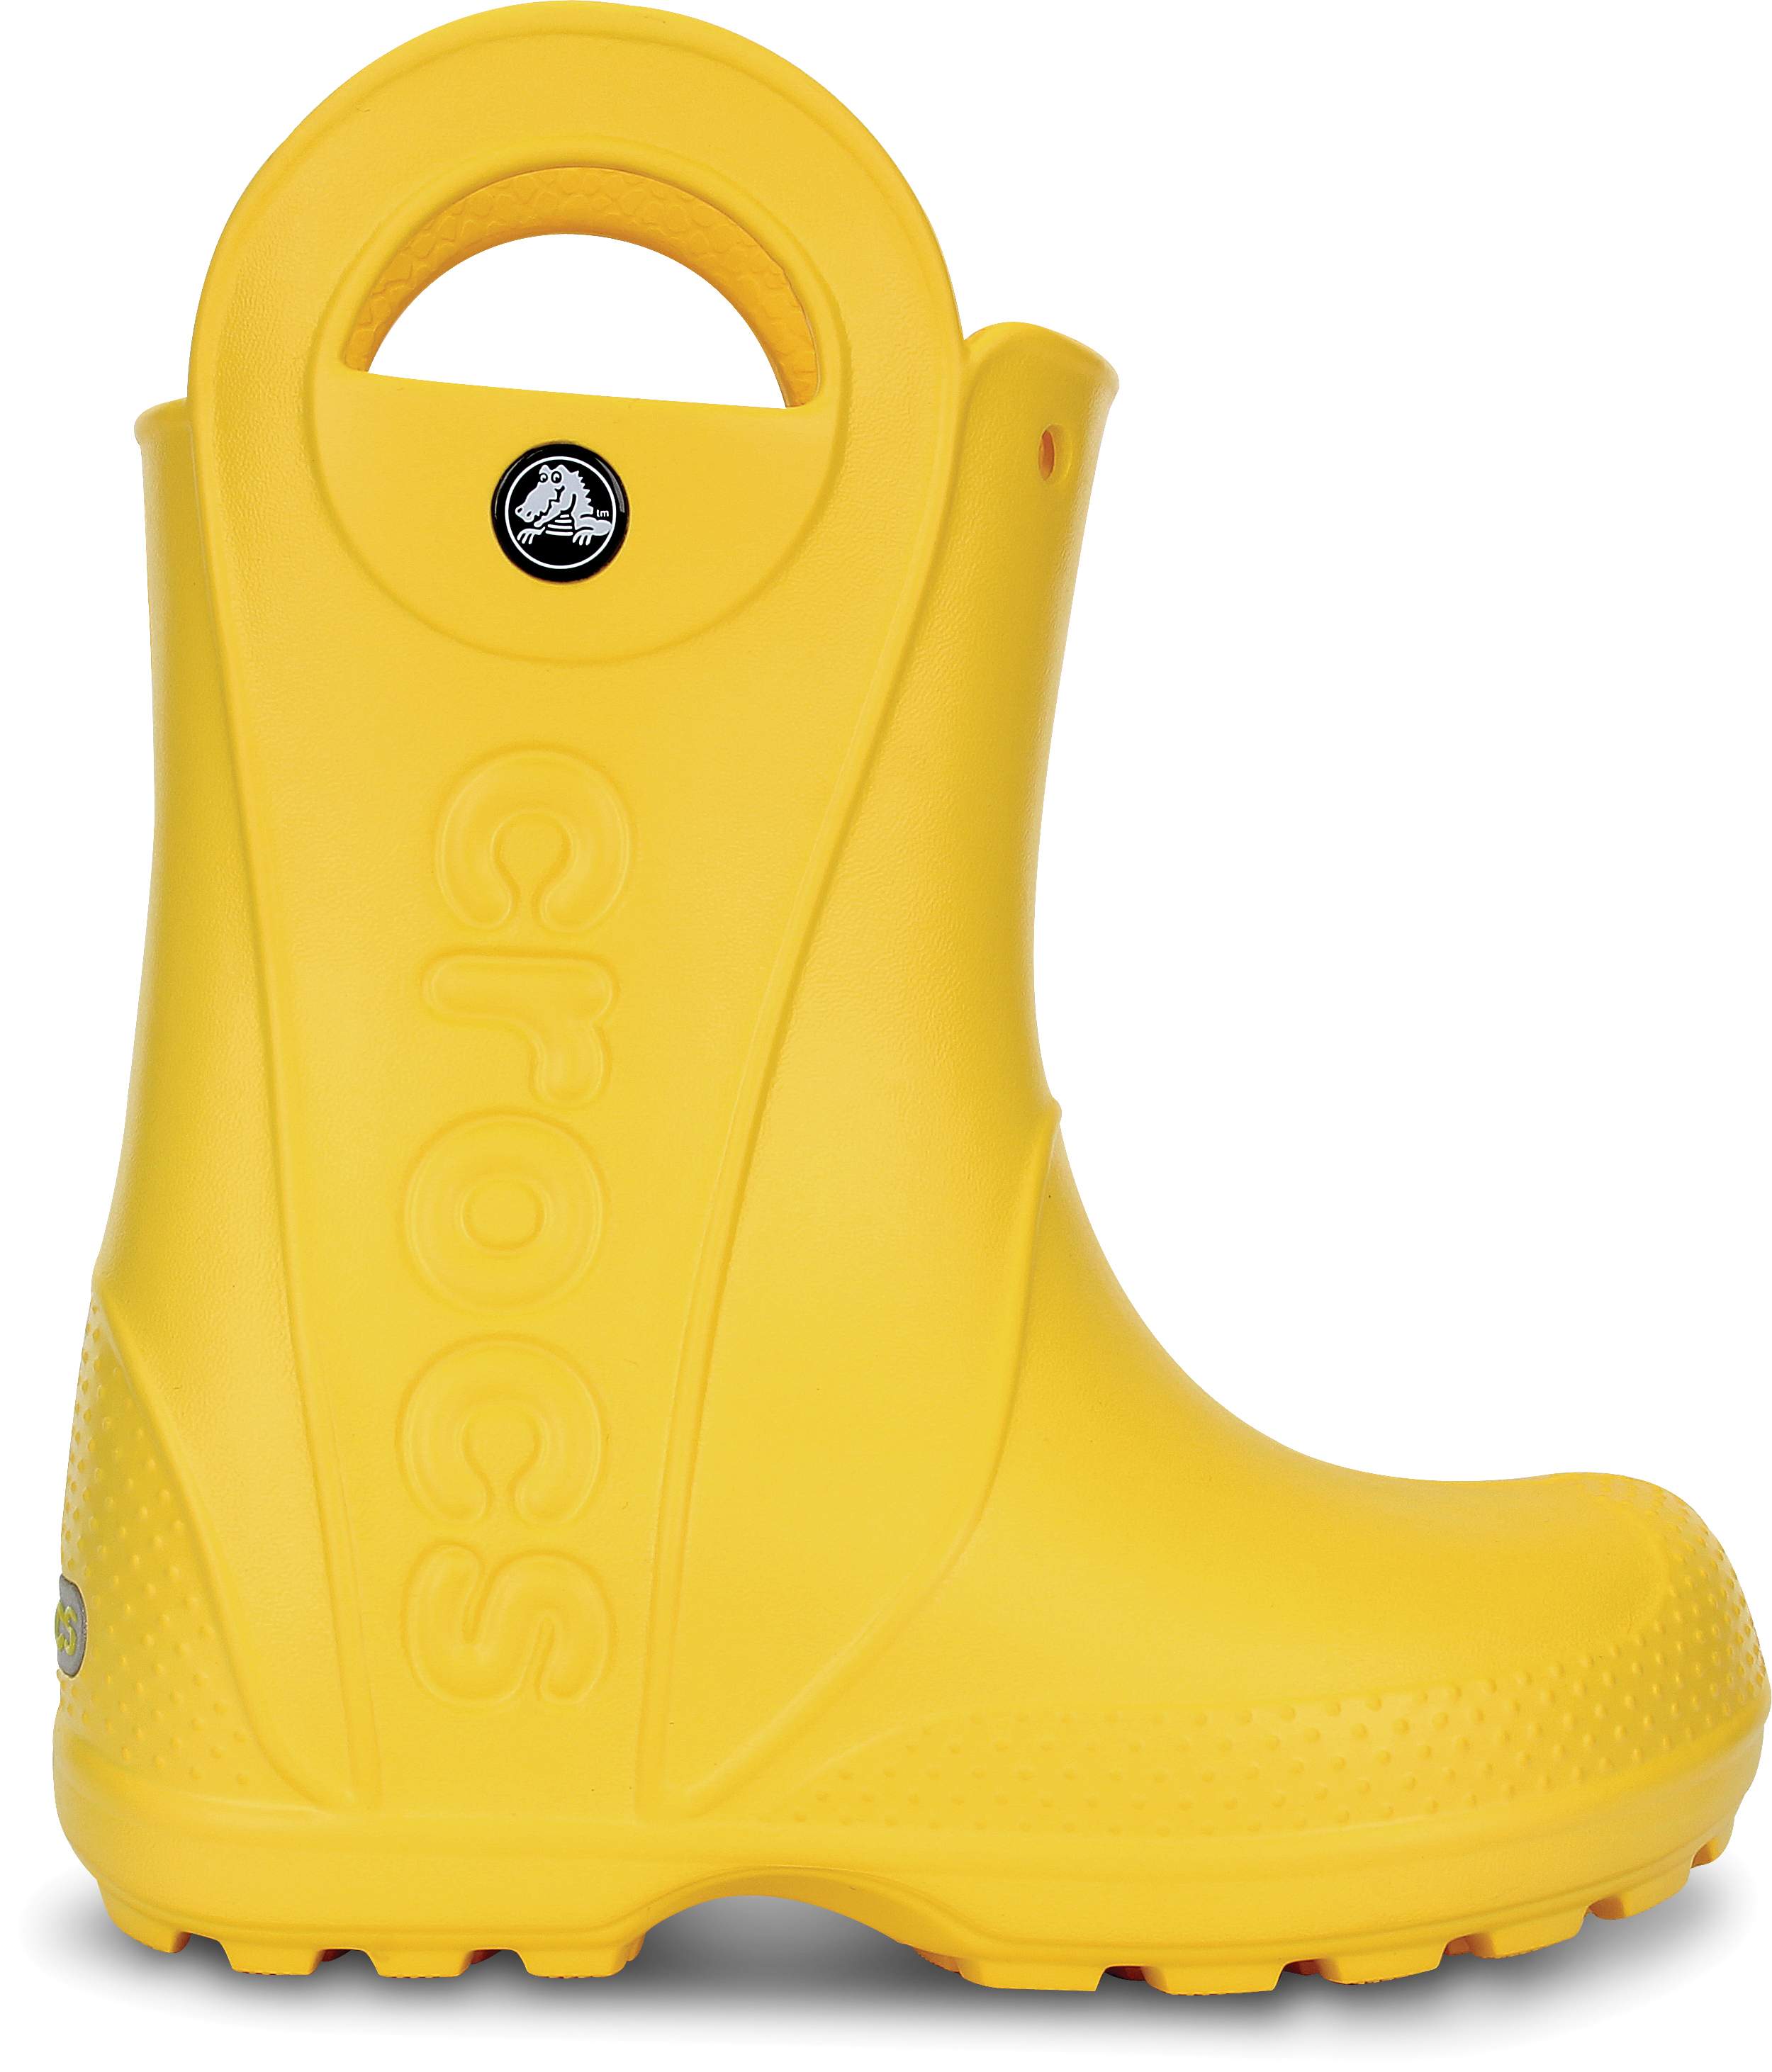 crocs boots for toddlers